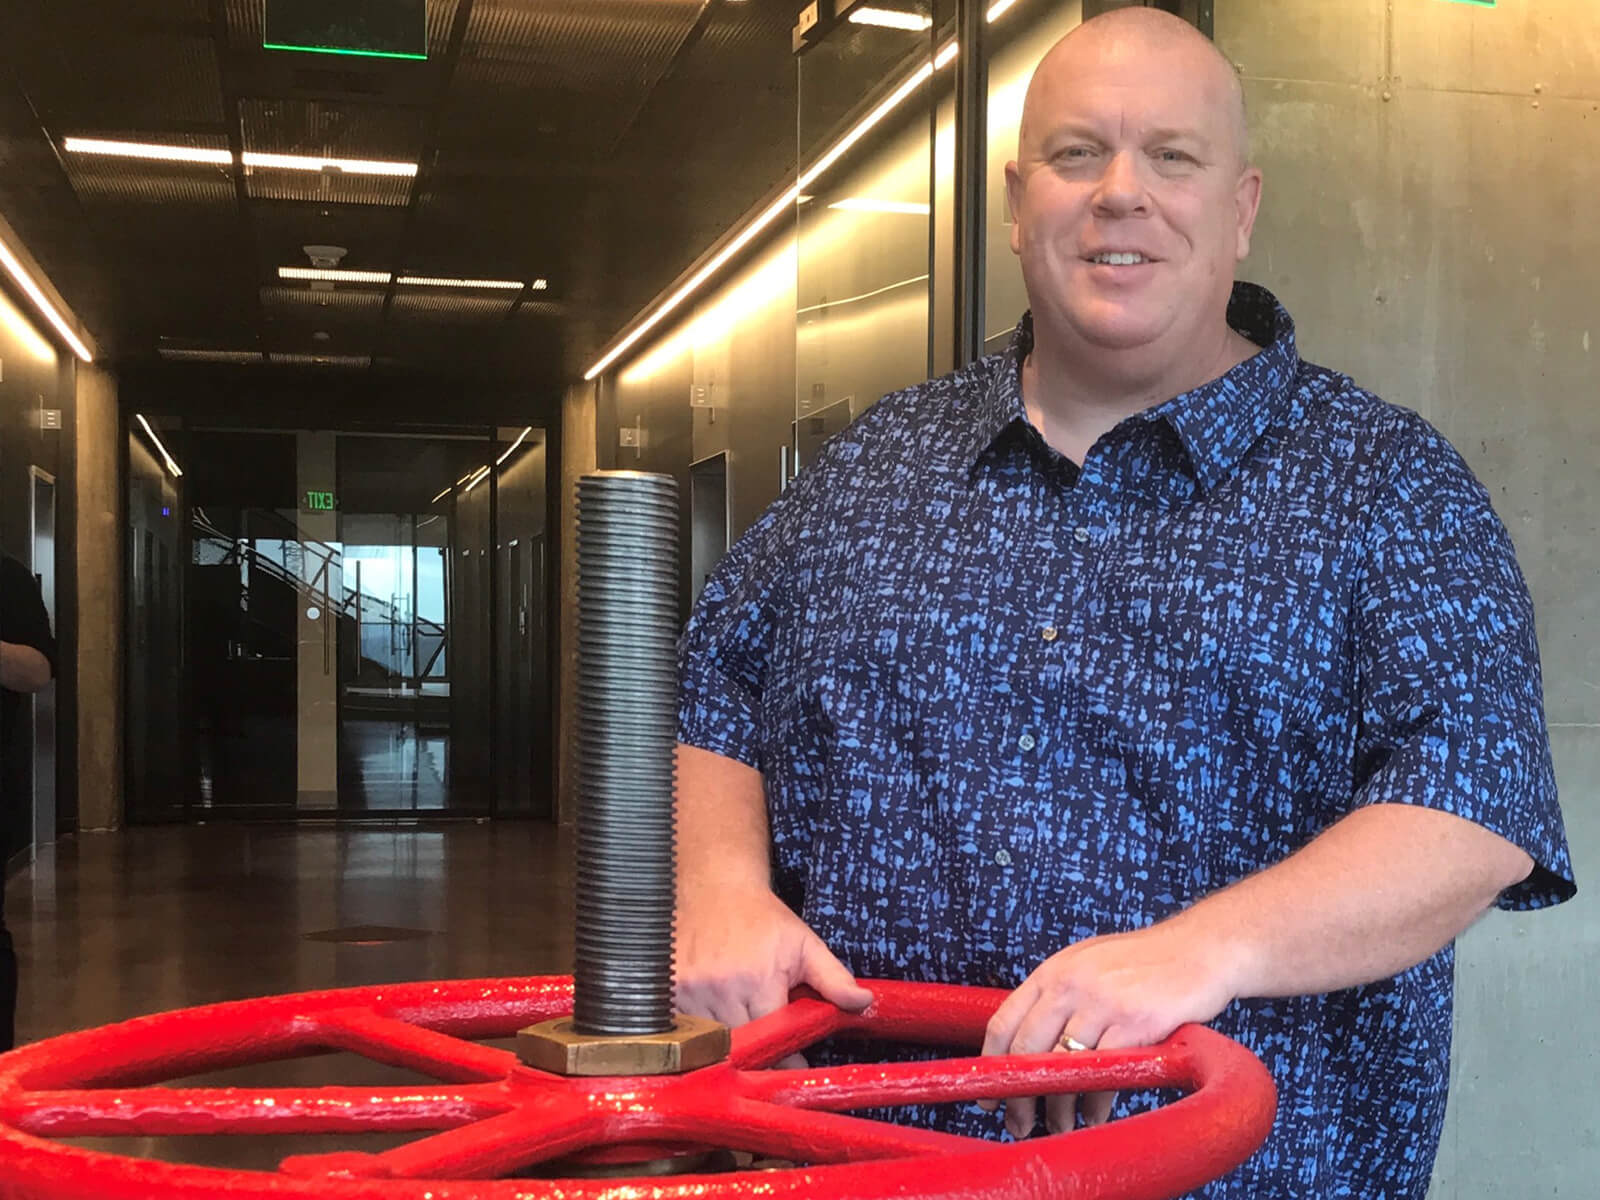 Eric Smith poses with the actual valve at the Valve office